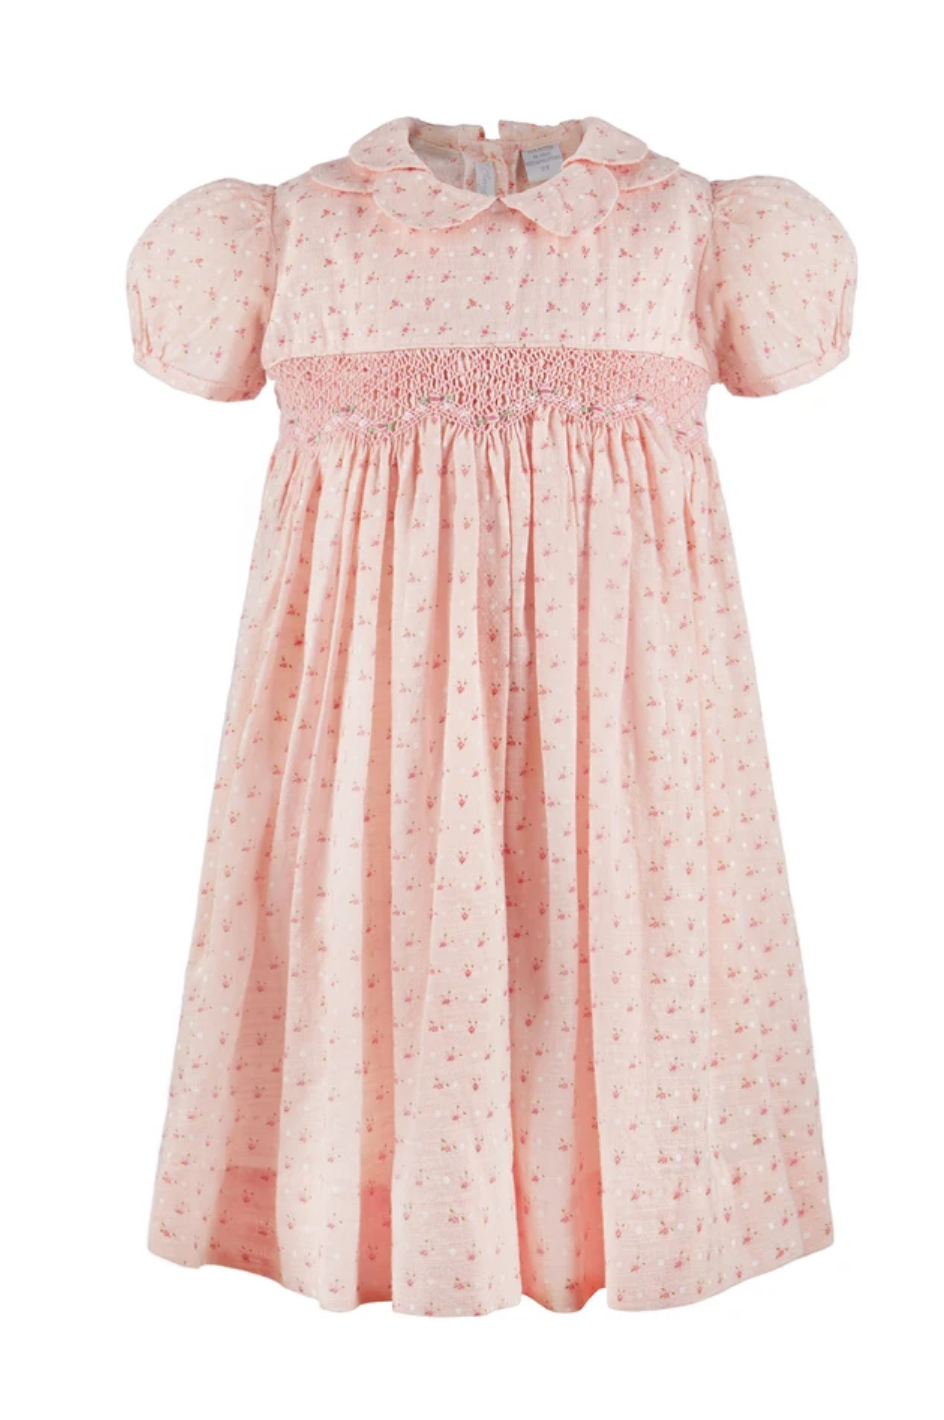 carriage boutique mini pink floral smocked dress